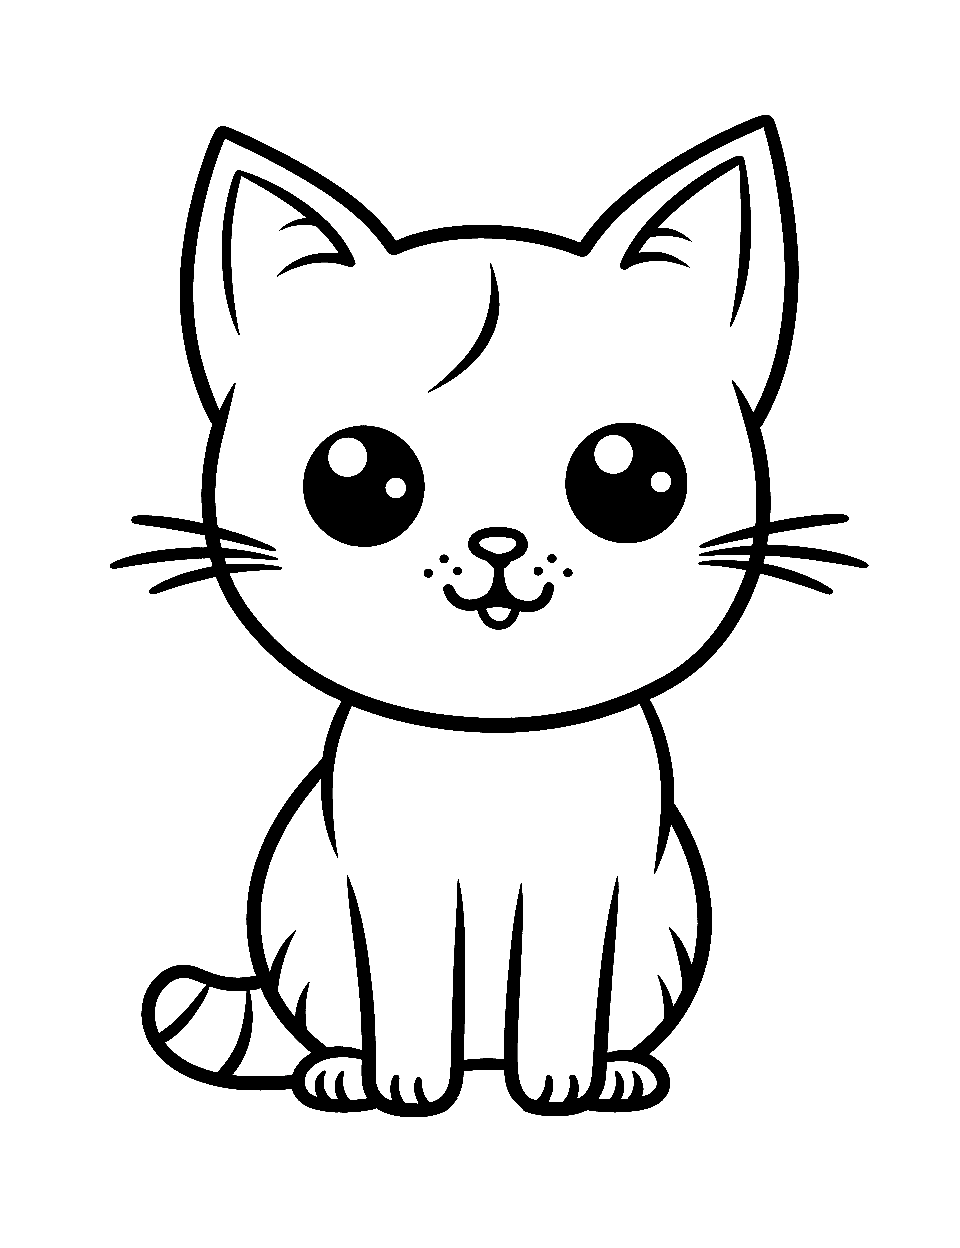 Easy Kitty Outline Kitten Coloring Page - A simple, clear outline of a seated kitten for beginners to color.